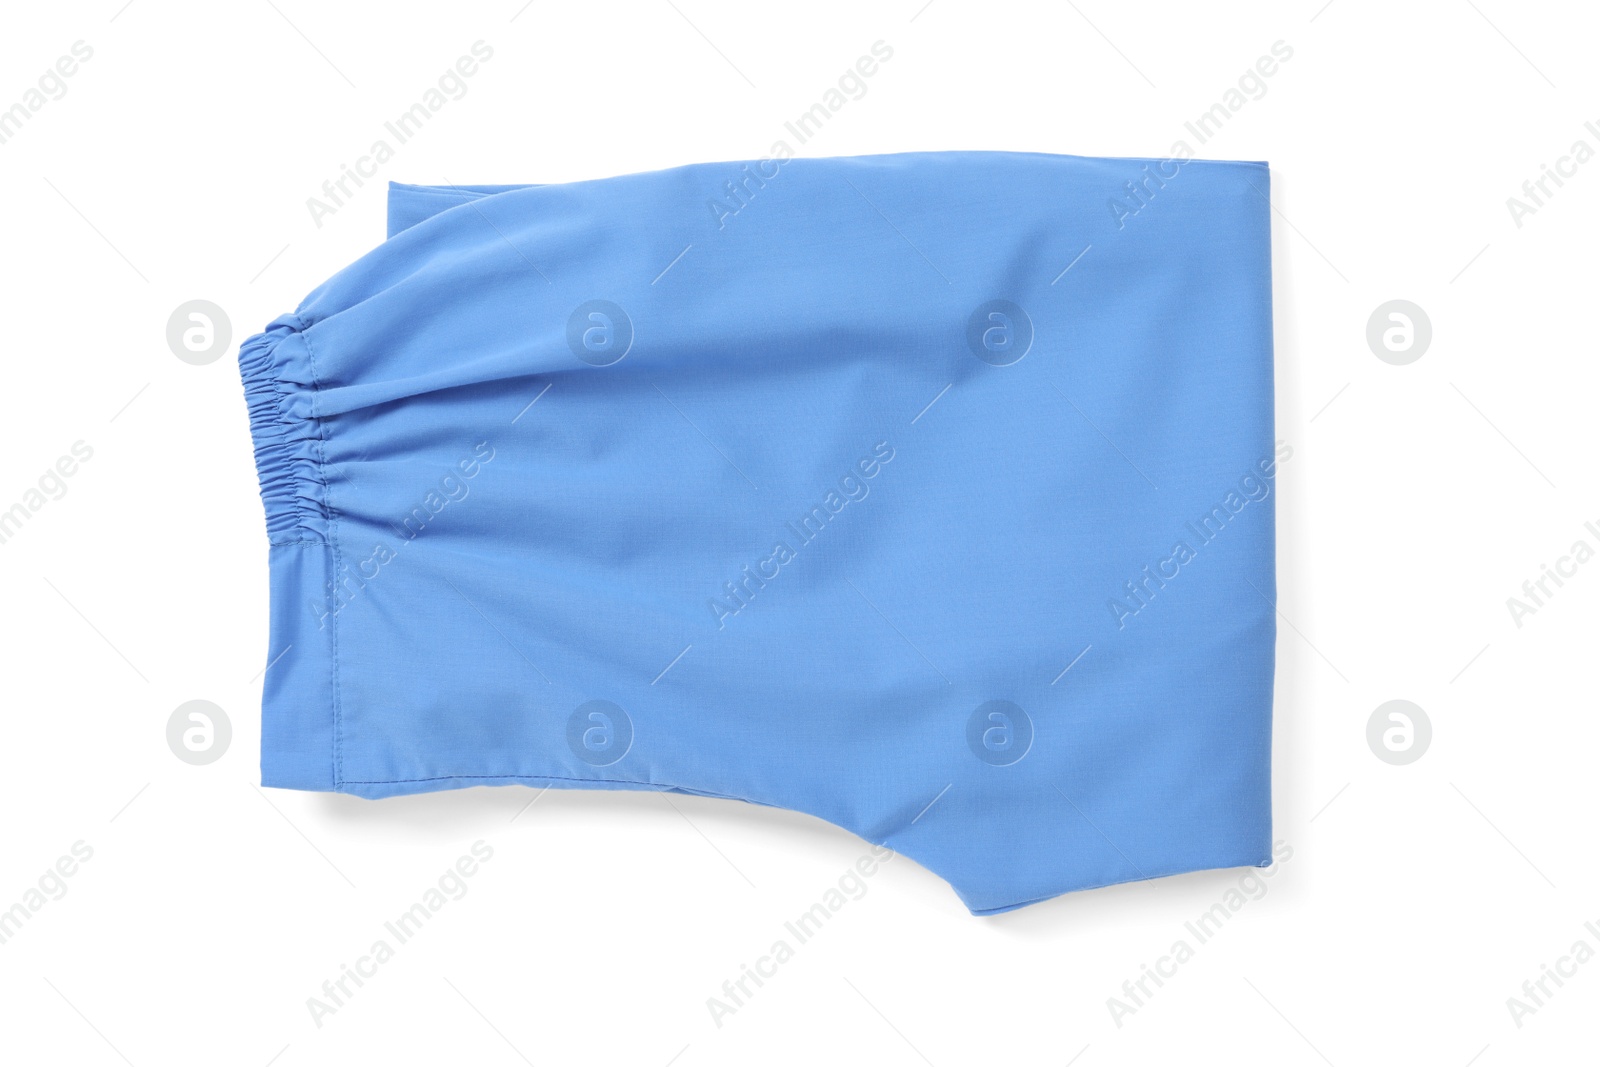 Photo of Medical uniform isolated on white, top view